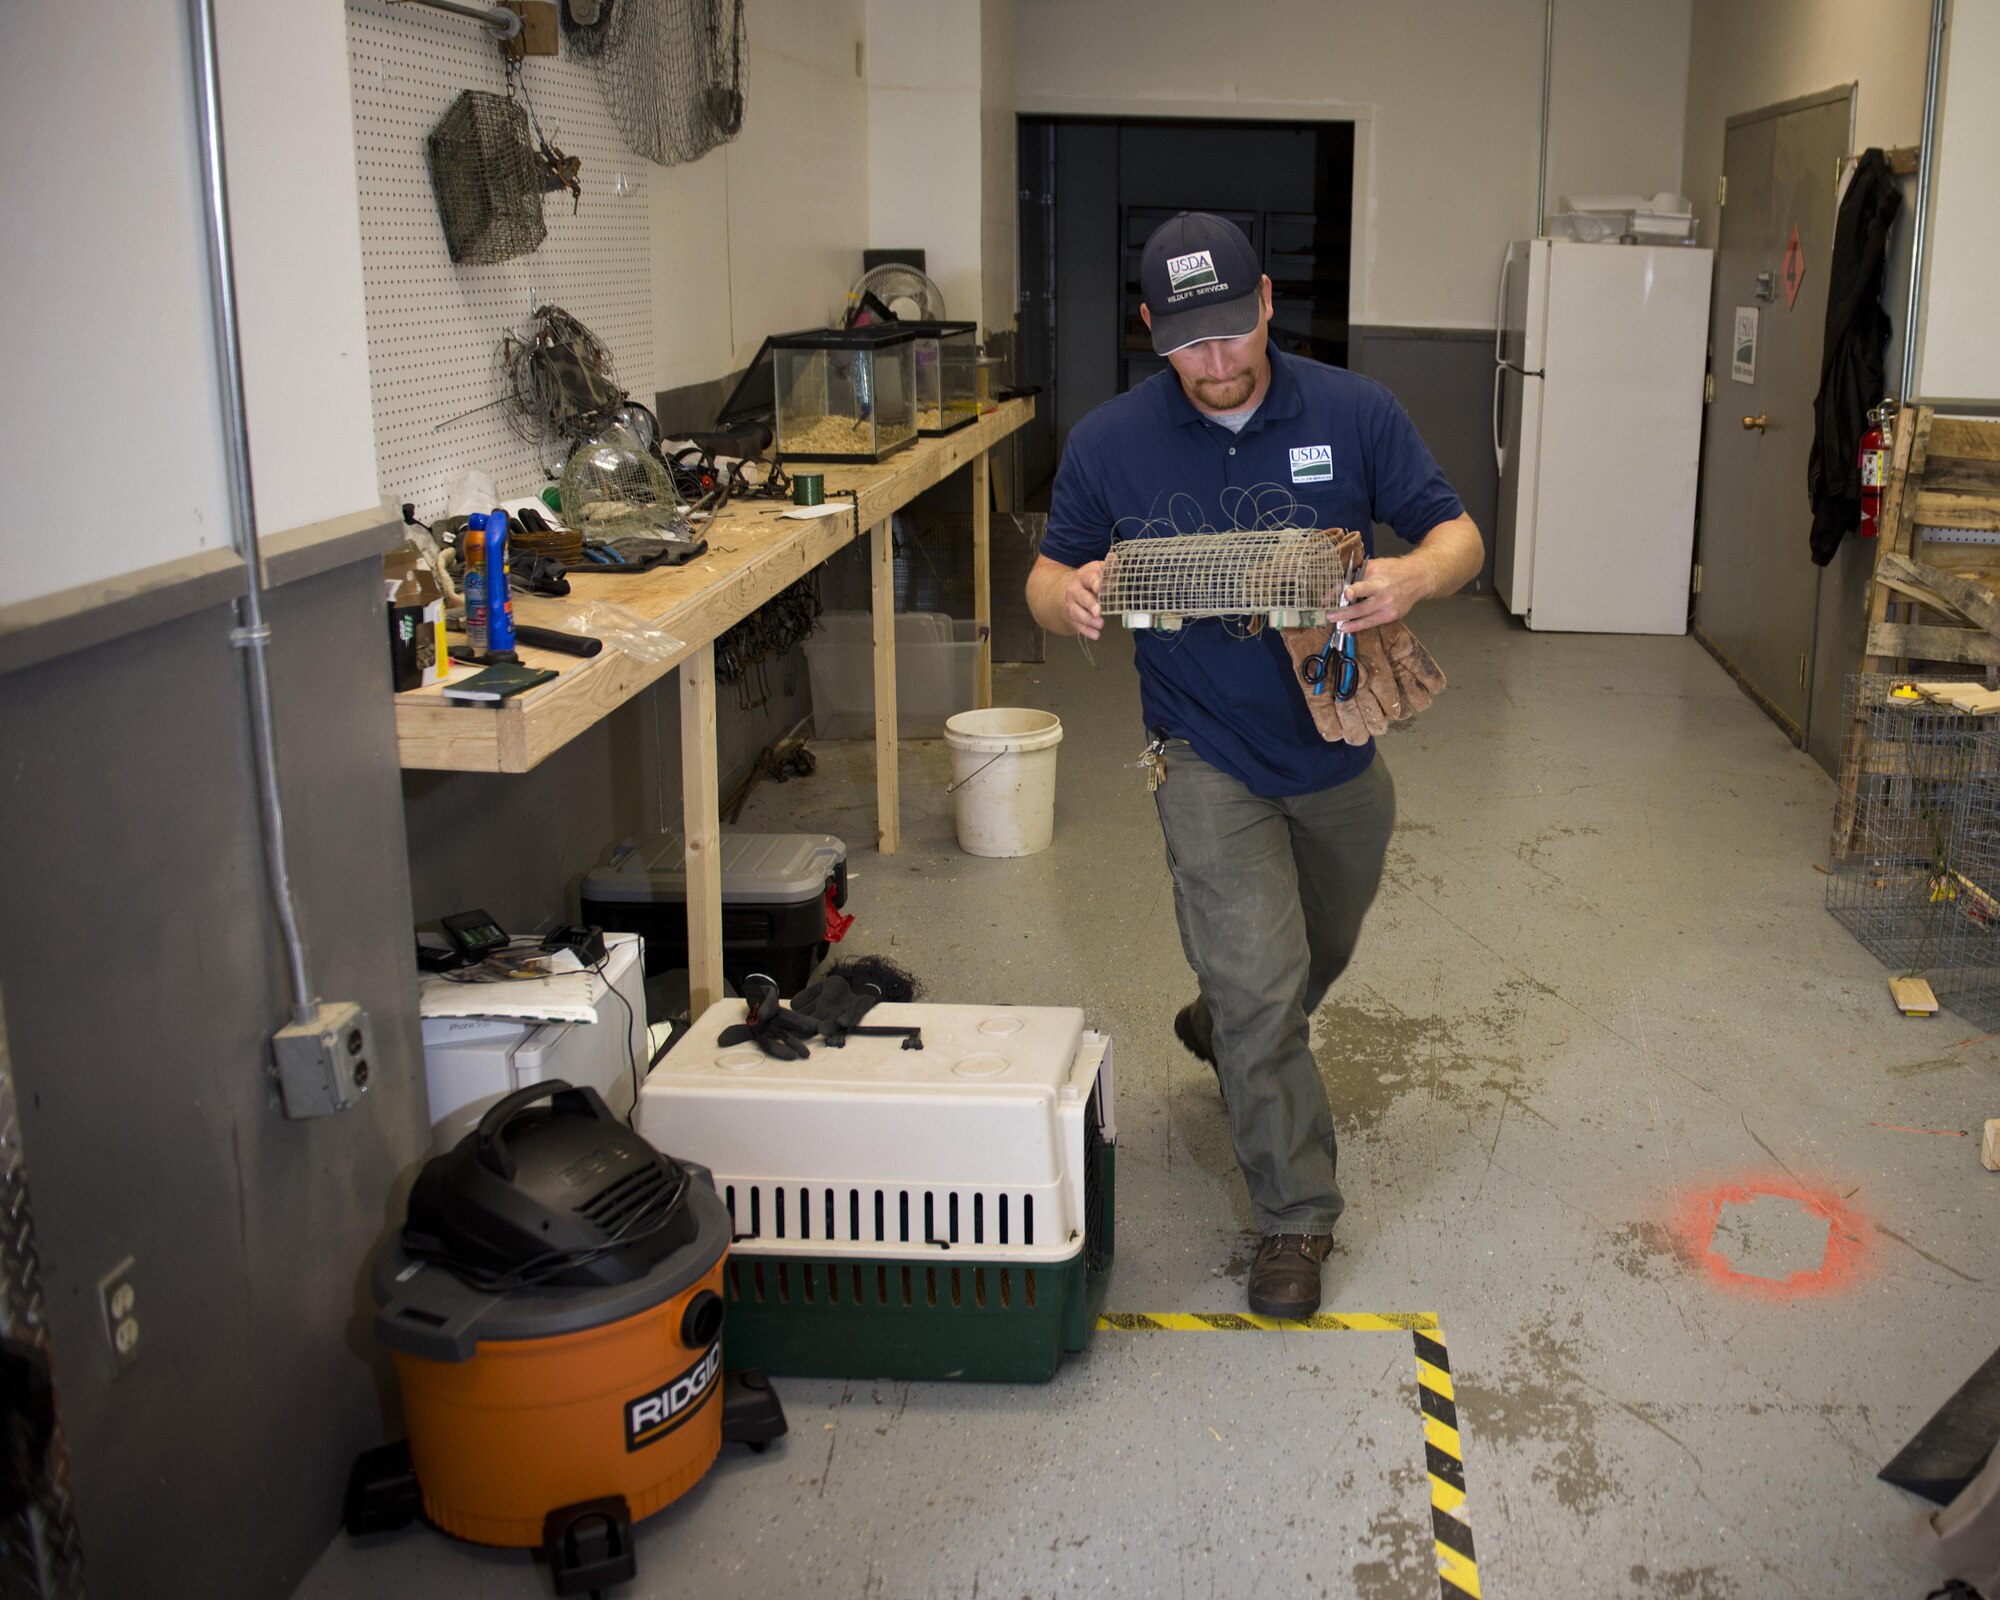 Dale Waites, U.S. Department of Agriculture wildlife biologist, carries a live trap at Minot Air Force Base, N.D., July 15, 2016. Waites relocates birds away from the airfield, as part of the Bird Airstrike Hazard program (BASH), to mitigate damage to aircraft engines. (U.S. Air Force photo/Airman 1st Class J.T. Armstrong)